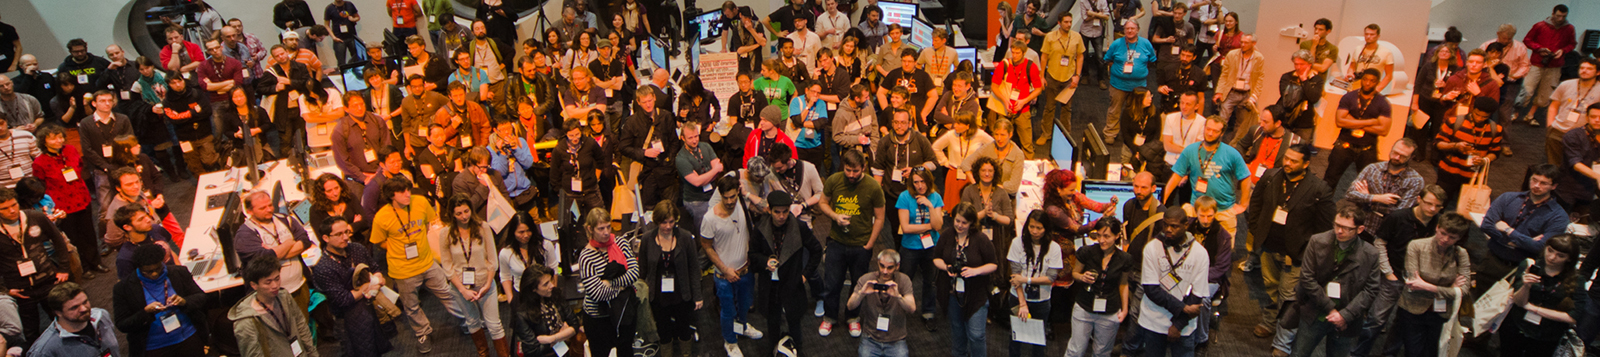 Image of crowd at MozFest